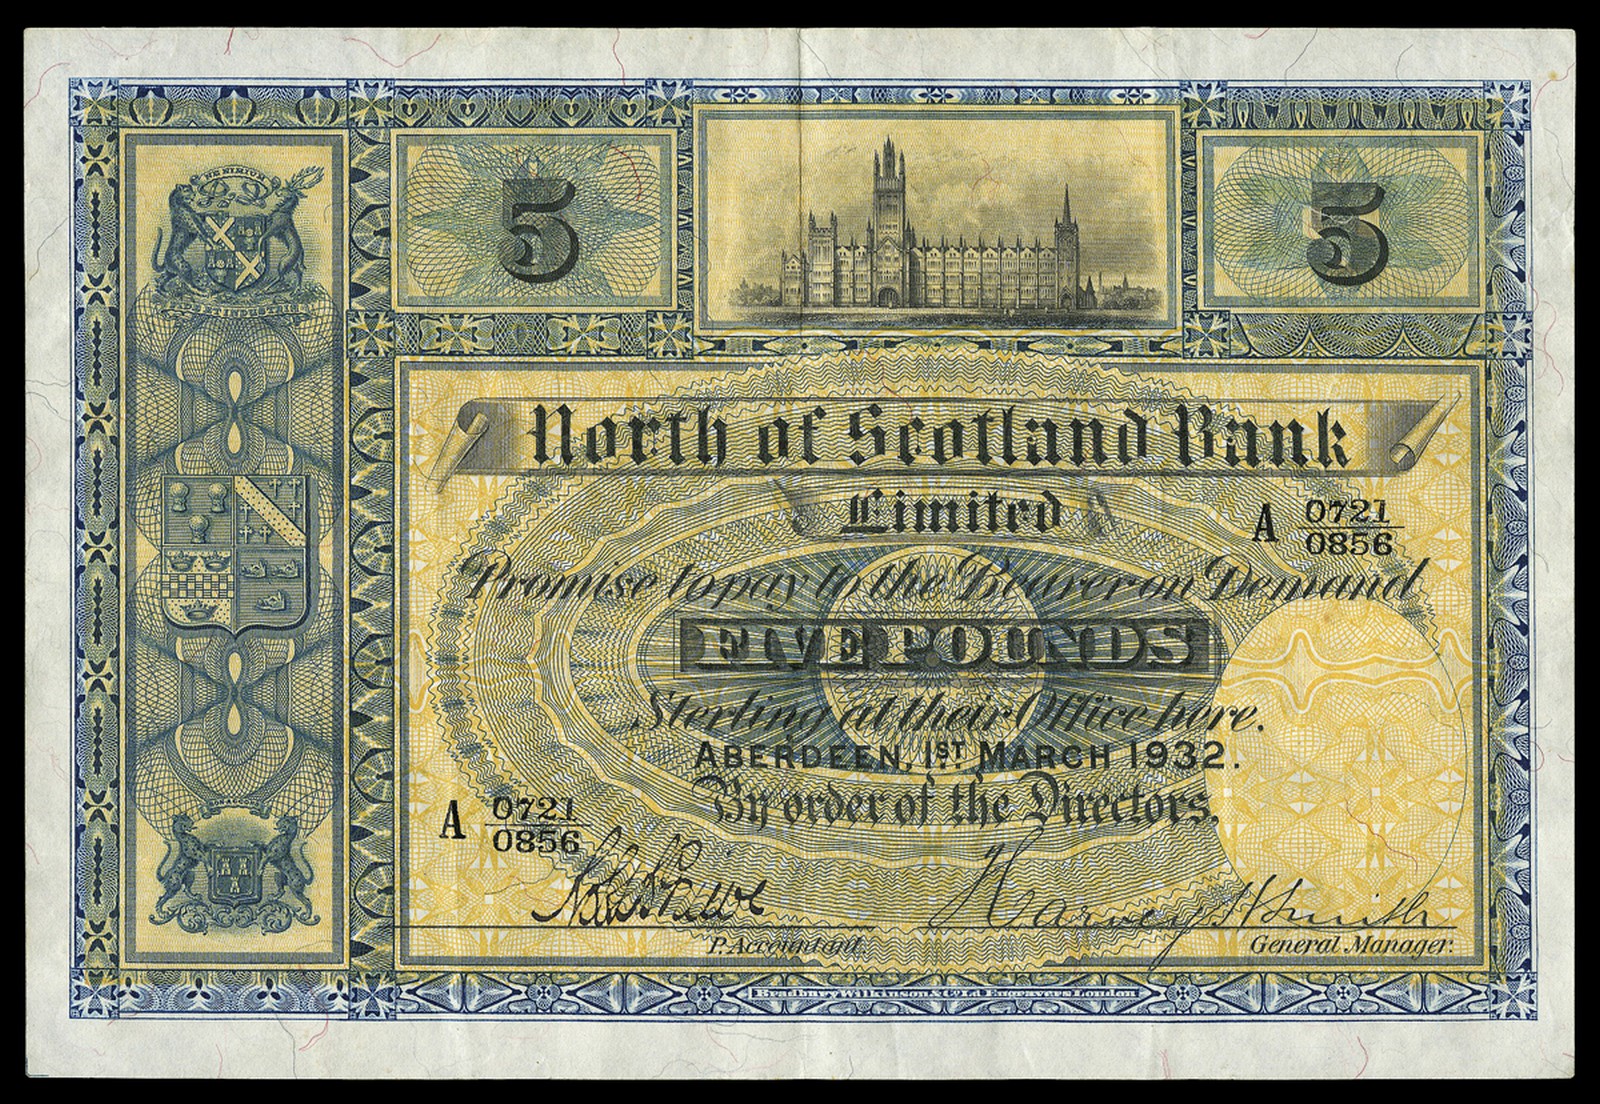 BRITISH BANKNOTES, North of Scotland Bank Ltd, Five Pounds, 1 March 1932, A 0721/0856, Smith-